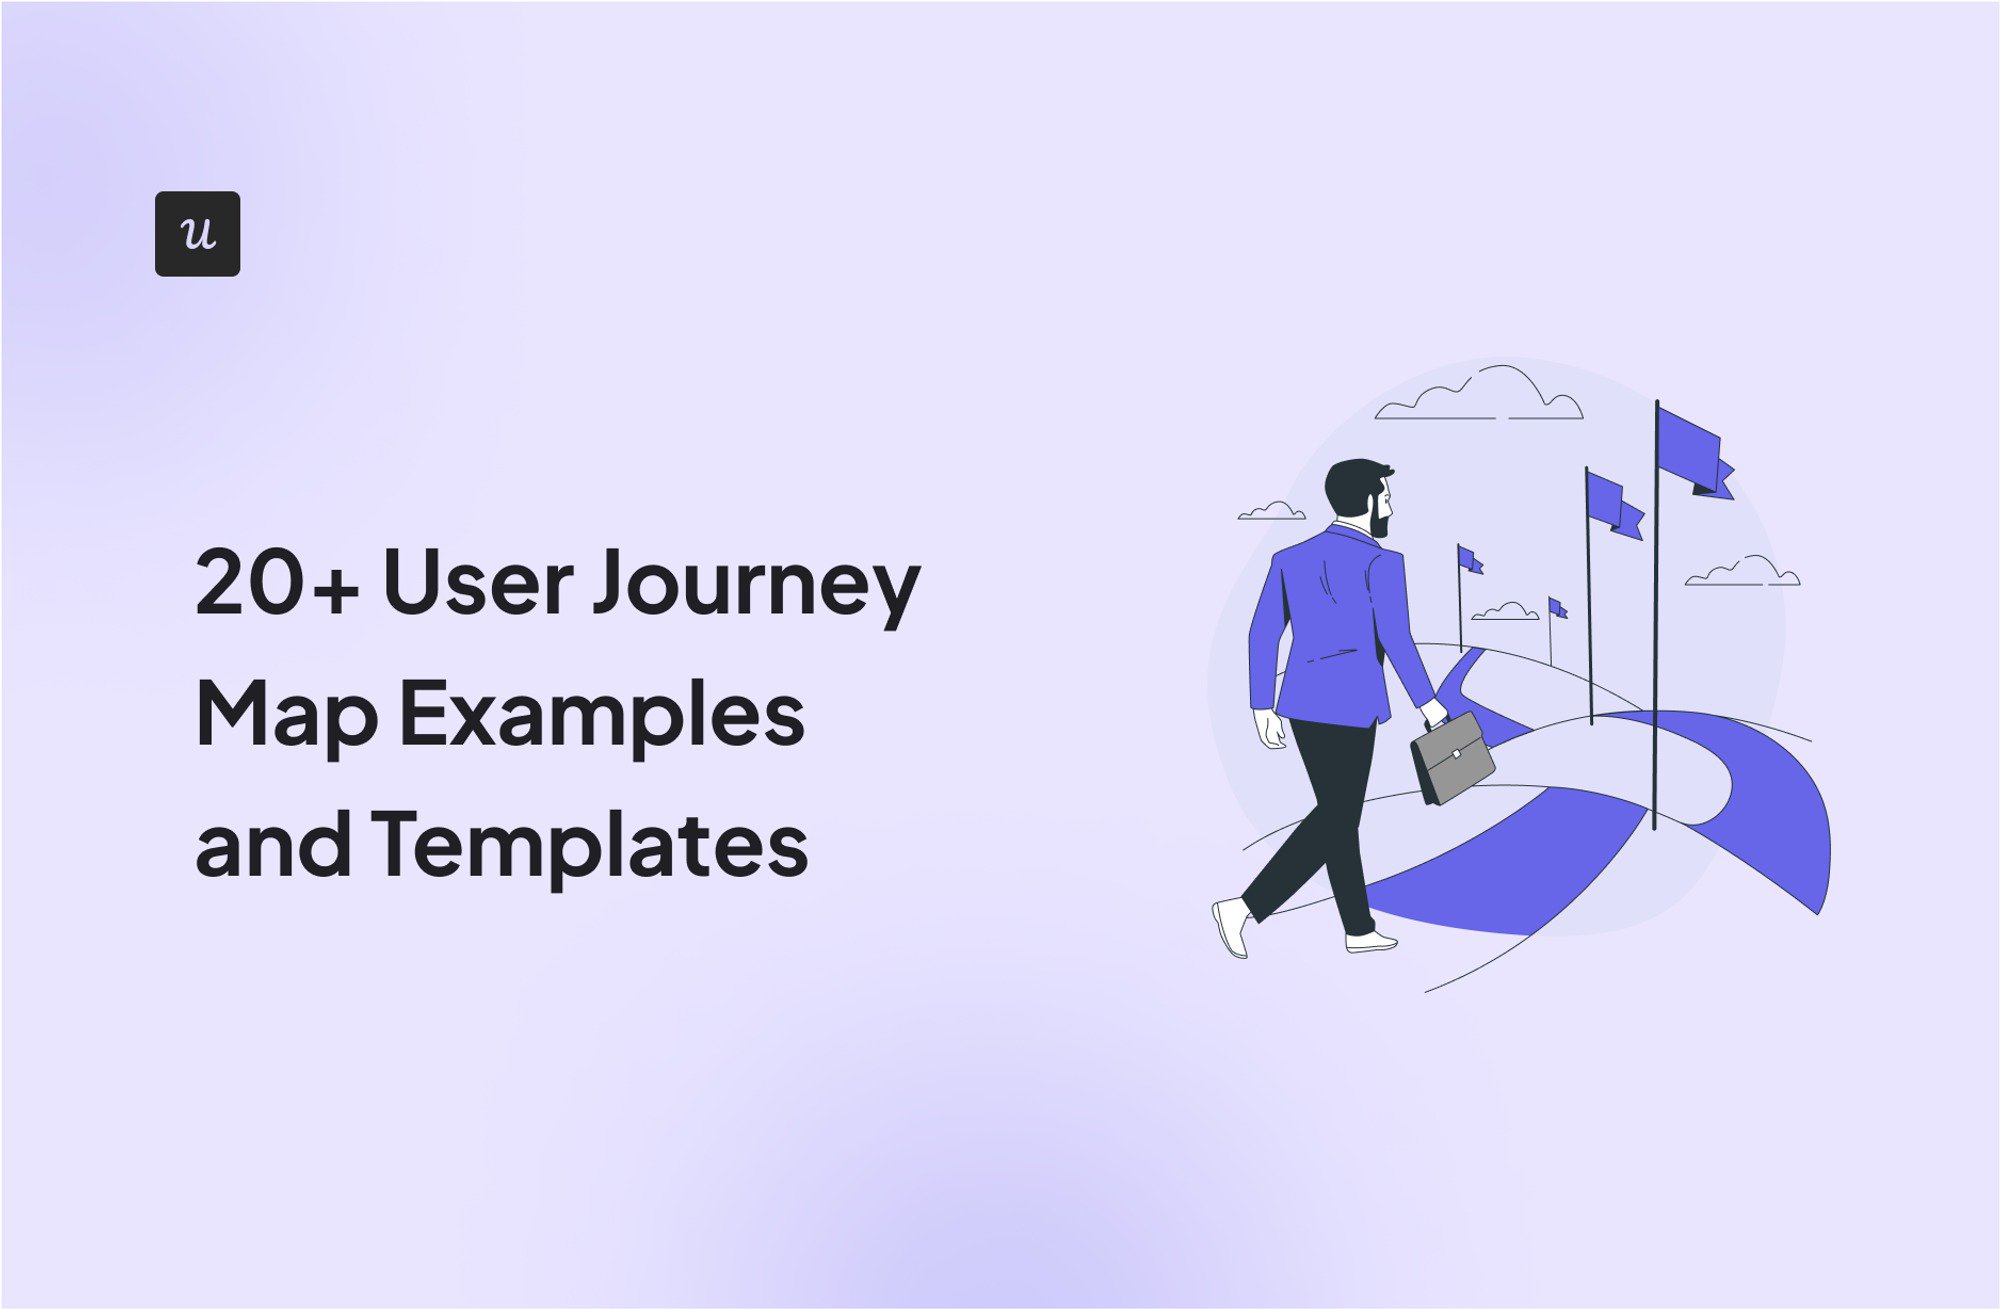 20+ User Journey Map Examples and Templates cover